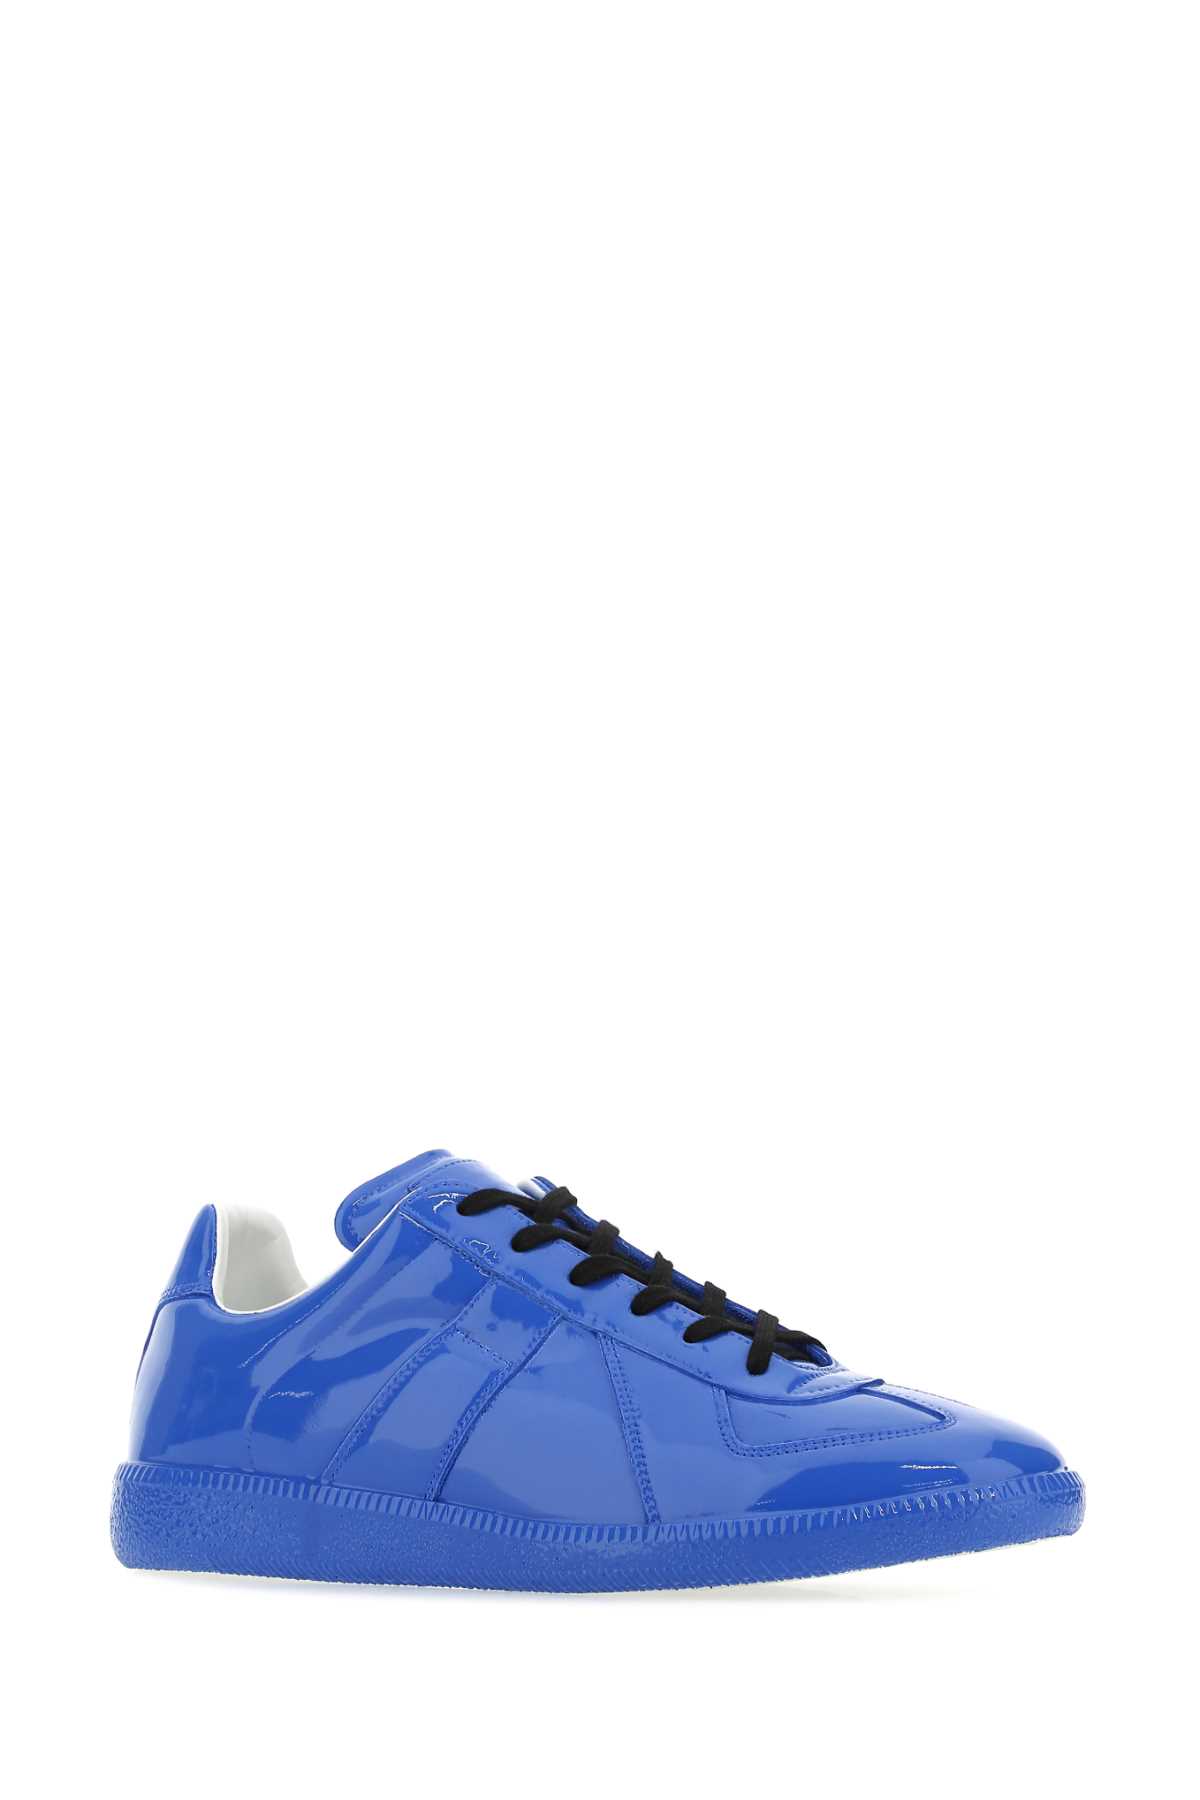 Maison Margiela Electric Blue Leather Replica Sneakers In T6046